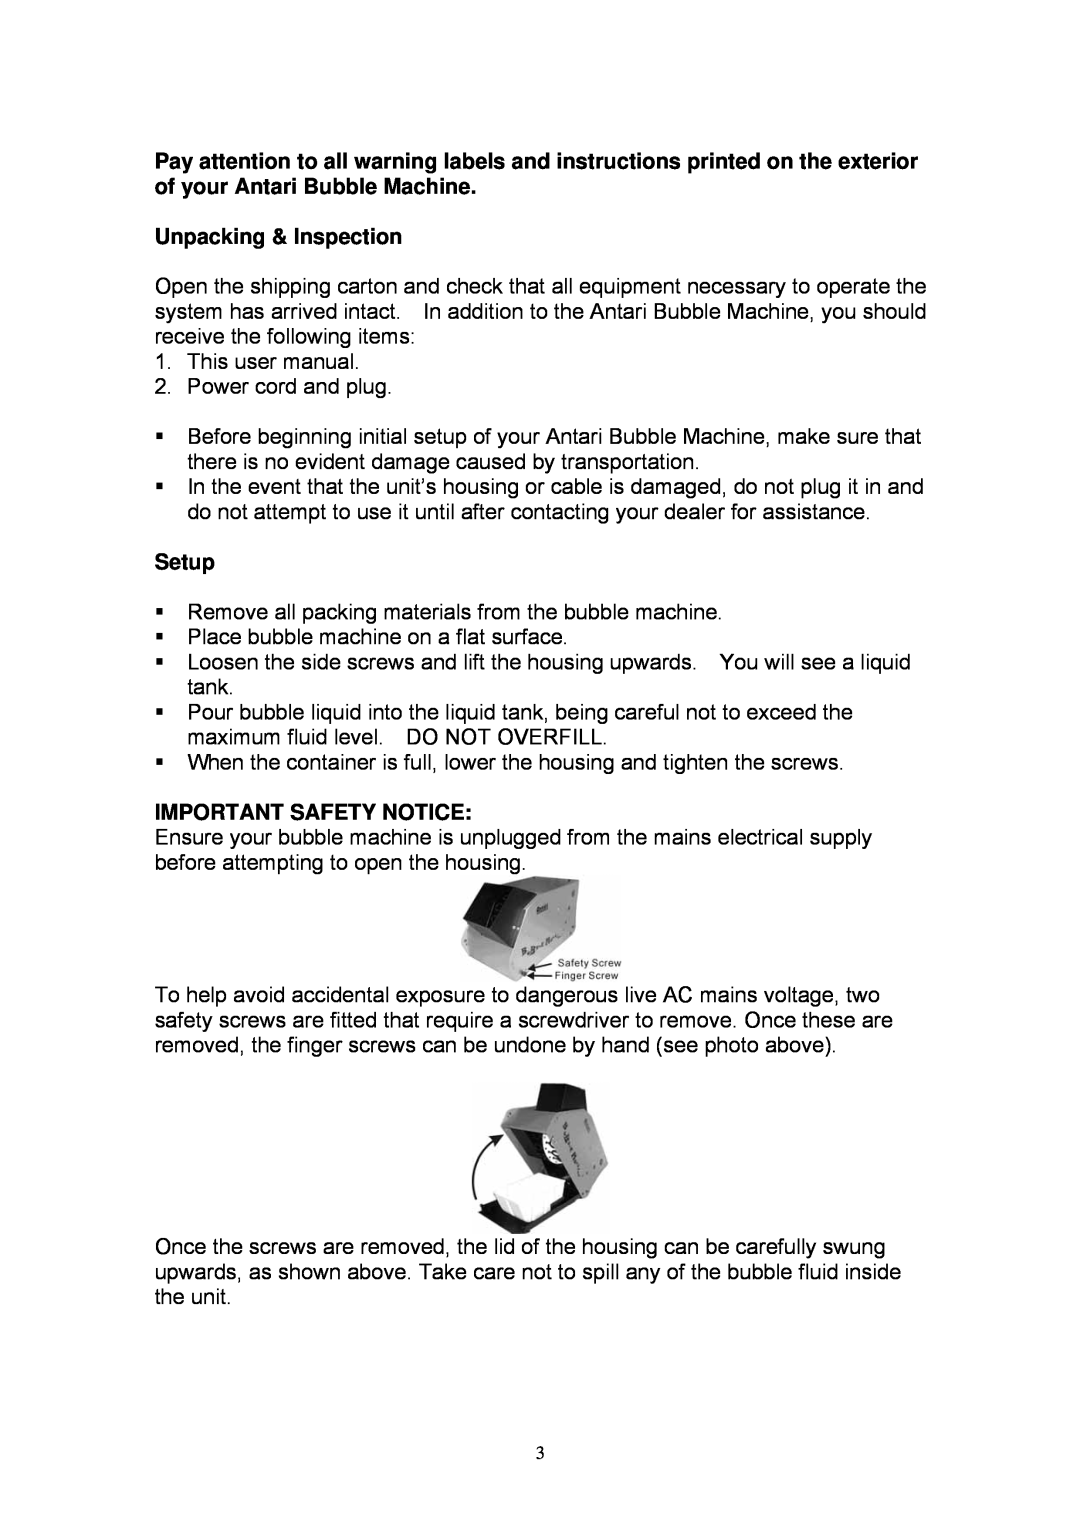 Antari Lighting and Effects B-100(X) user manual Unpacking & Inspection, Setup, Important Safety Notice 